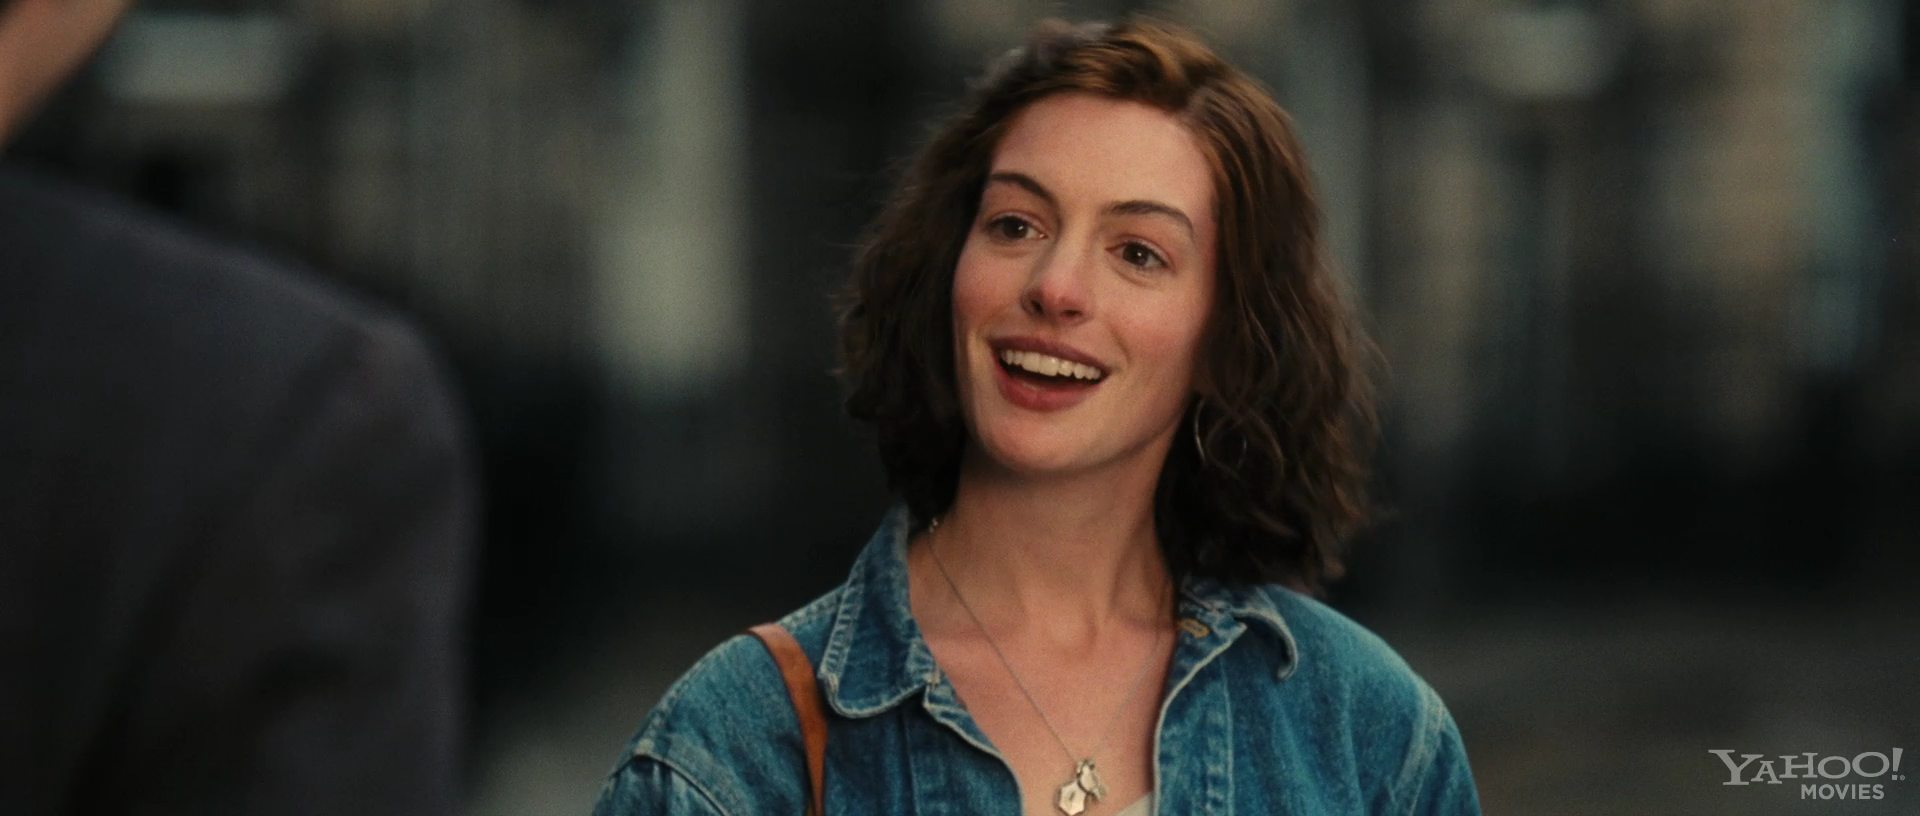 Anne Hathaway One Day Trailer 2011 Anne Hathaway Image 21846713 Fanpop Page 5